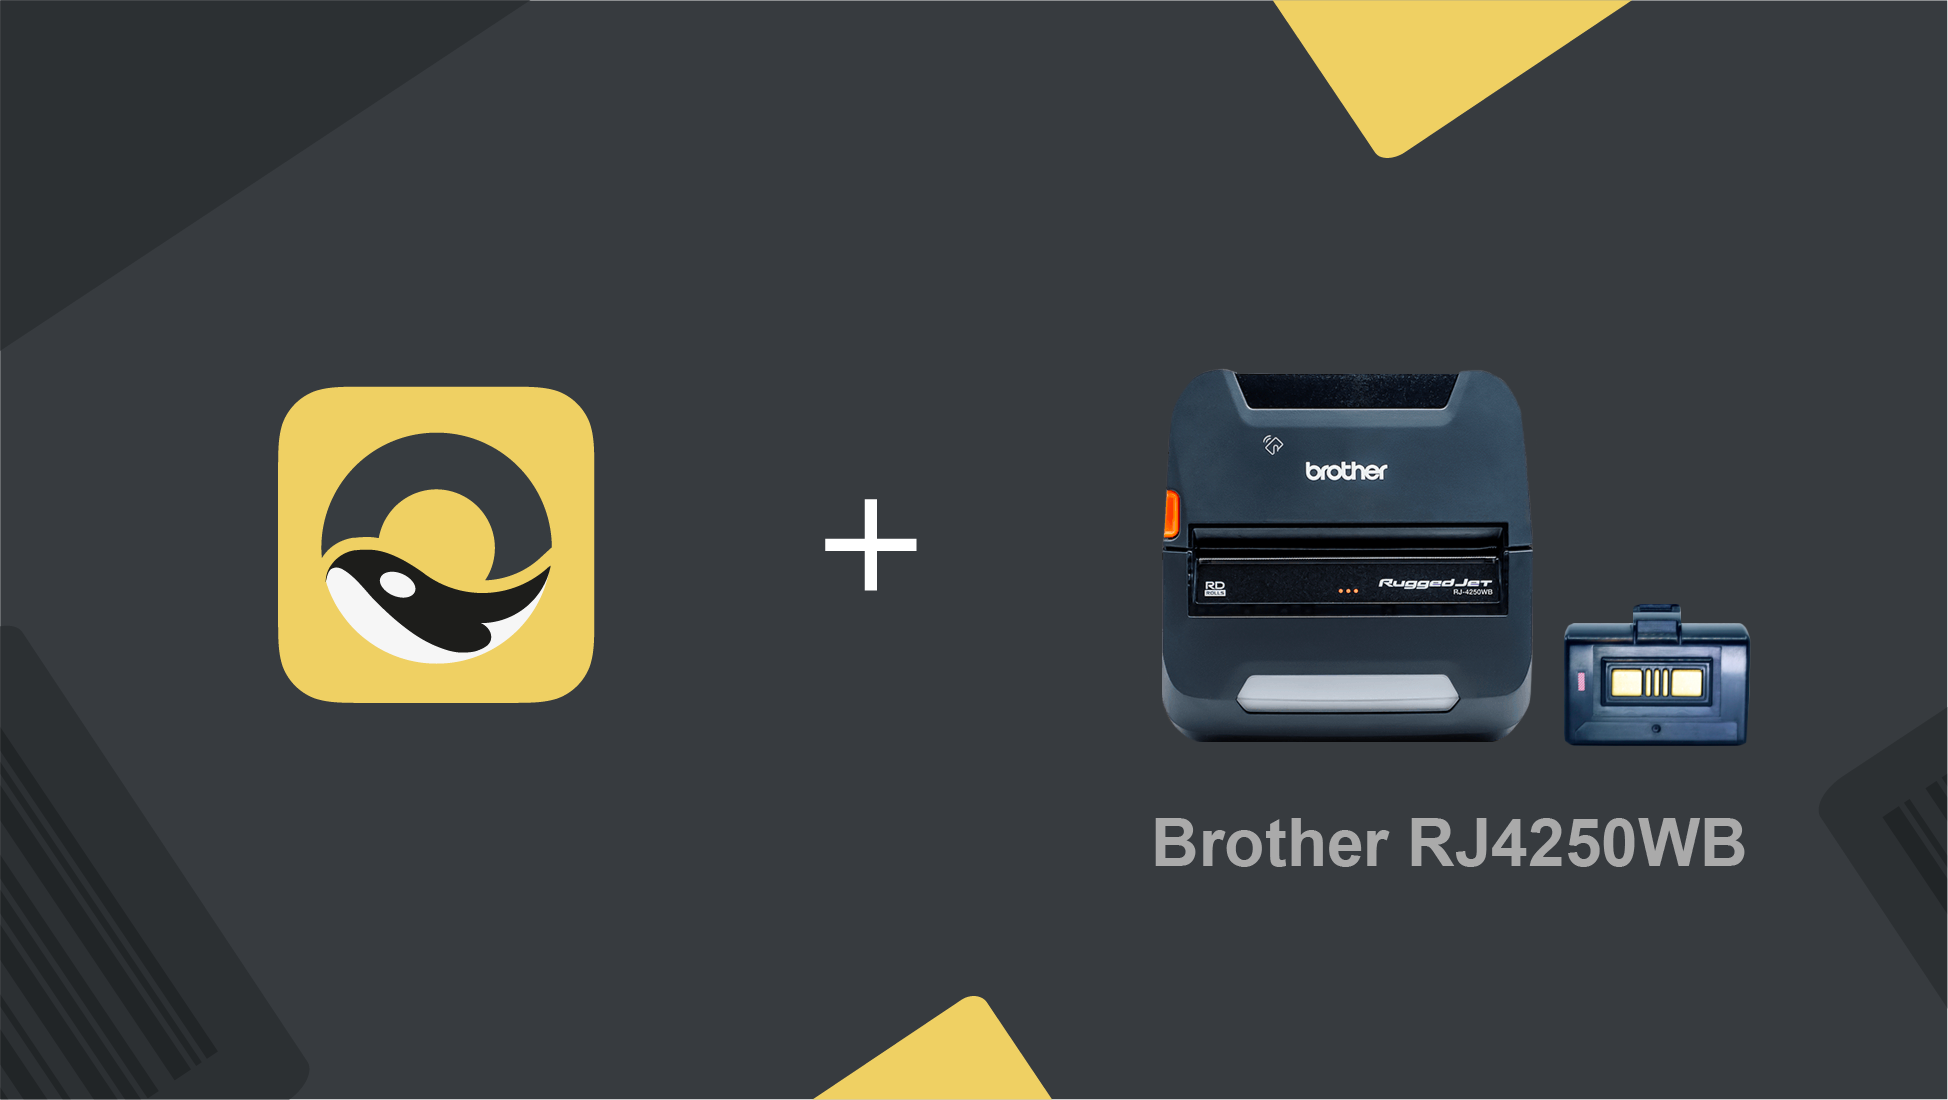 How to print barcodes using the Brother RJ4250WB printer